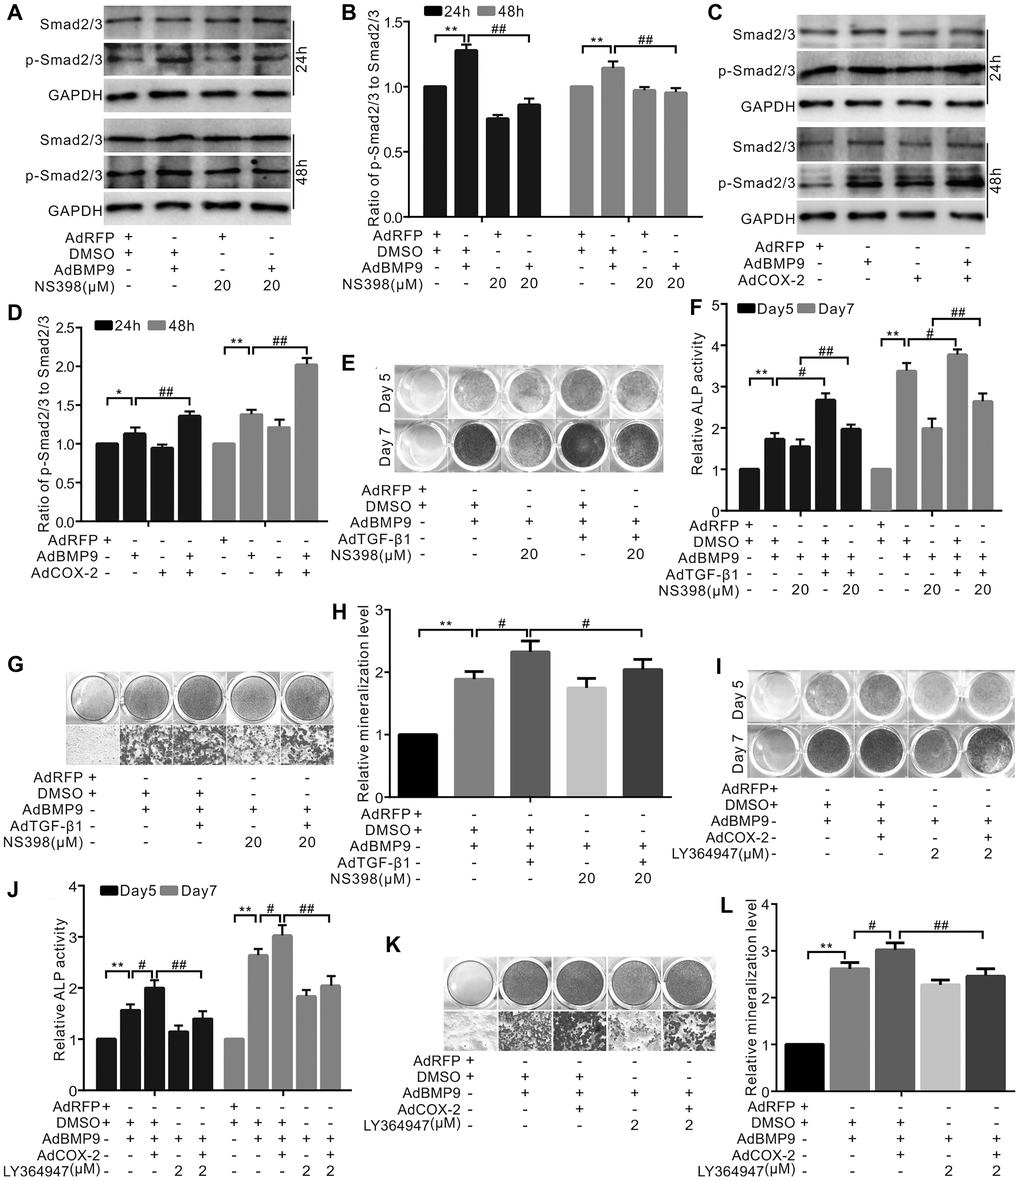 The effect of TGF-β1 and/or COX-2 on osteoblastic markers induced by BMP9 in C3H10T1/2 cells. (A) Western blotting shows that NS-398 and/or BMP9 affect Smad2/3 and p-Smad2/3 (phosphorylated Smad2/3). (B) Quantification results of Western blots assay shows Smad2/3 or p-Smad2/3 was affected by NS-398 and/or BMP9. (C) Western blotting shows the level of Smad2/3 or p-Smad2/3 was affected by COX-2 and/or BMP9. (D) Quantification results of western blot assay shows the level of Smad2/3 and/or p-Smad2/3 was affected by COX-2 and/or BMP9. (E) ALP staining shows the effect of NS-398, TGF-β1, and/or BMP9 on ALP activity. (F) Quantification of ALP staining shows that ALP activities were affected by NS-398, TGF-β1, and/or BMP9. (G) Alizarin Red S staining shows that the mineralization was affected by NS-398, TGF-β1, and/or BMP9. (H) Quantification results of Alizarin Red S assay shows that mineralization was affected by NS-398, BMP9, and/or TGF-β1. (I) ALP assay shows the BMP9-induced ALP activities was affected by COX-2 and LY364947. (J) Quantification of ALP assay shows that ALP activities were affected by COX-2, LY364947, and/or BMP9. (K) Alizarin Red S staining shows that the mineralization was affected by COX-2, LY364947, and/or BMP9. (L) Quantification results of Alizarin Red S staining shows that mineralization was affected by COX-2, LY364947, and/or BMP9. LY364947: TGF-βRI inhibitor; NS-398: COX-2 inhibitor. “**”p “#”p “##”p 